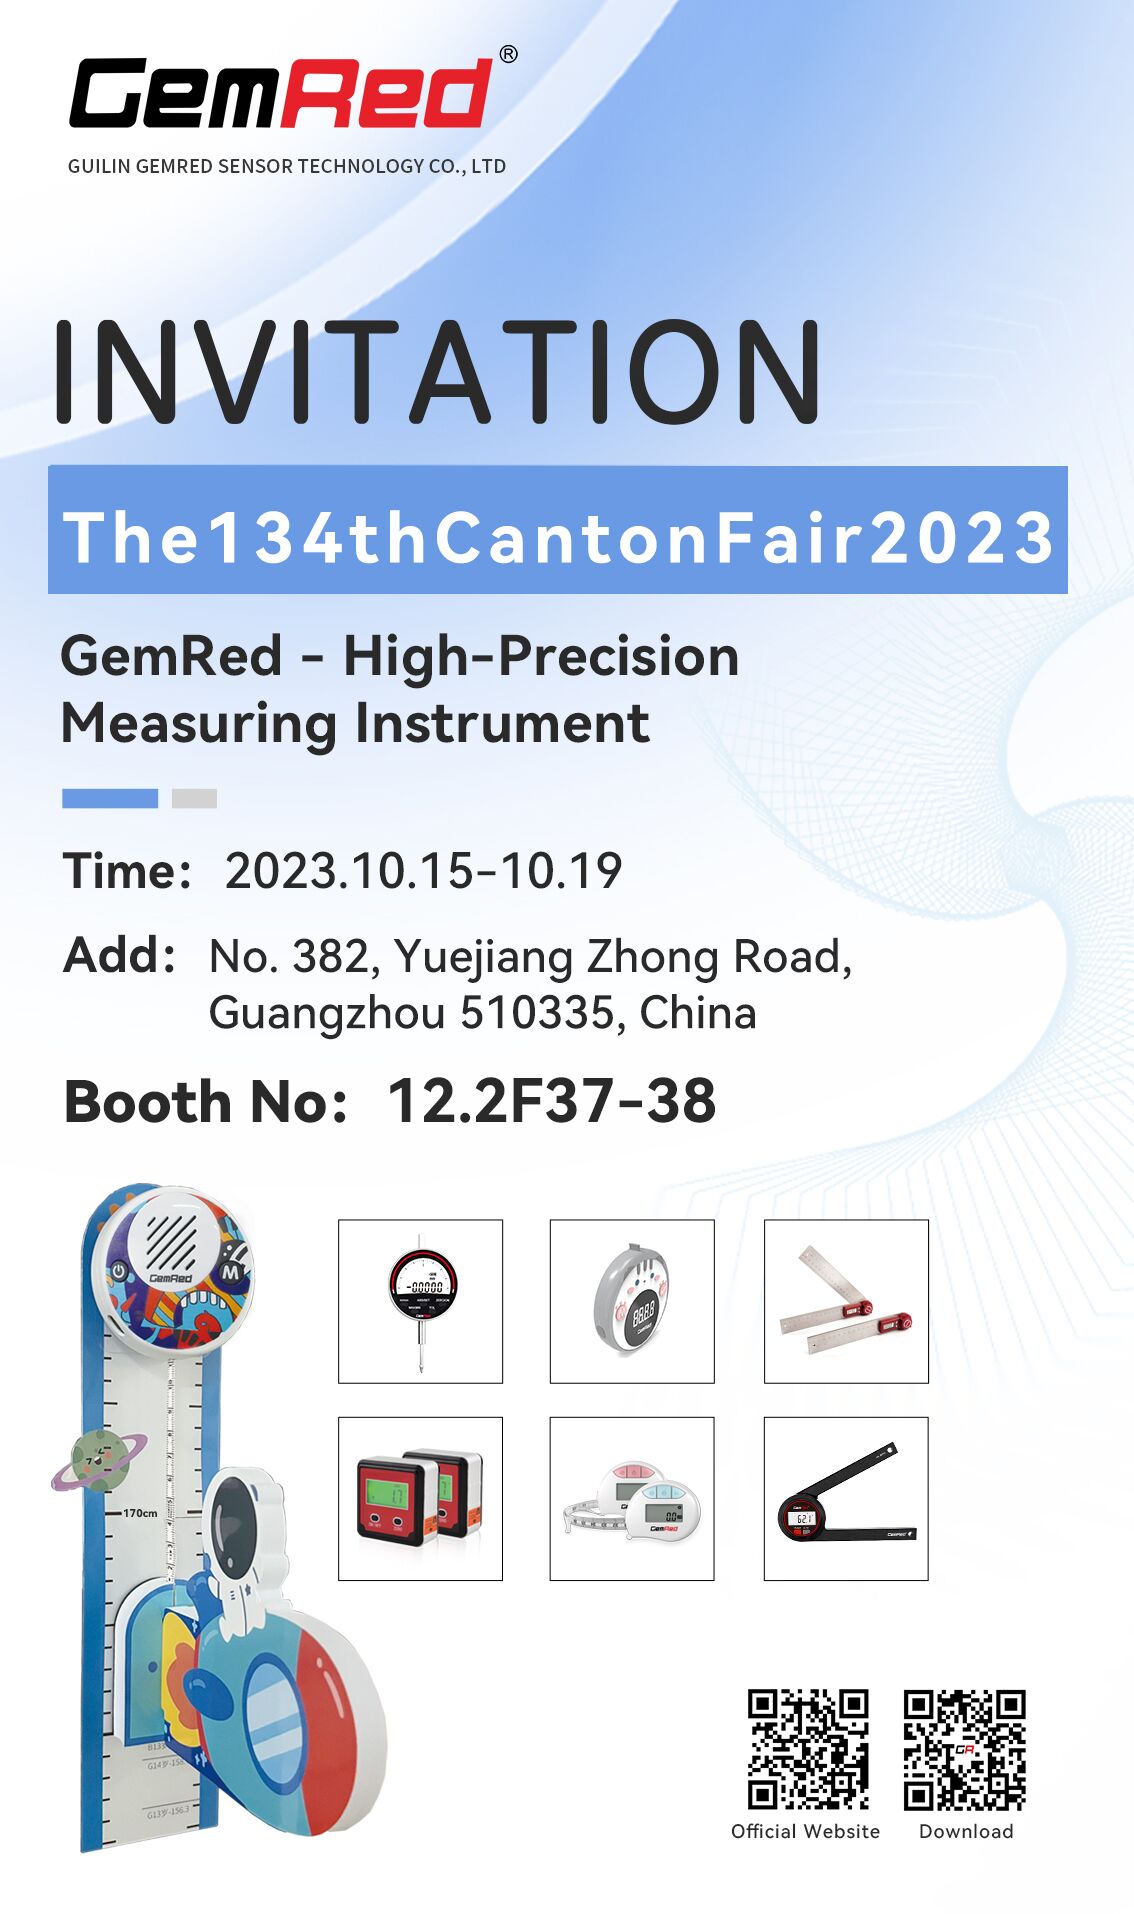 Join GemRed at the 134th CantonFair 2023